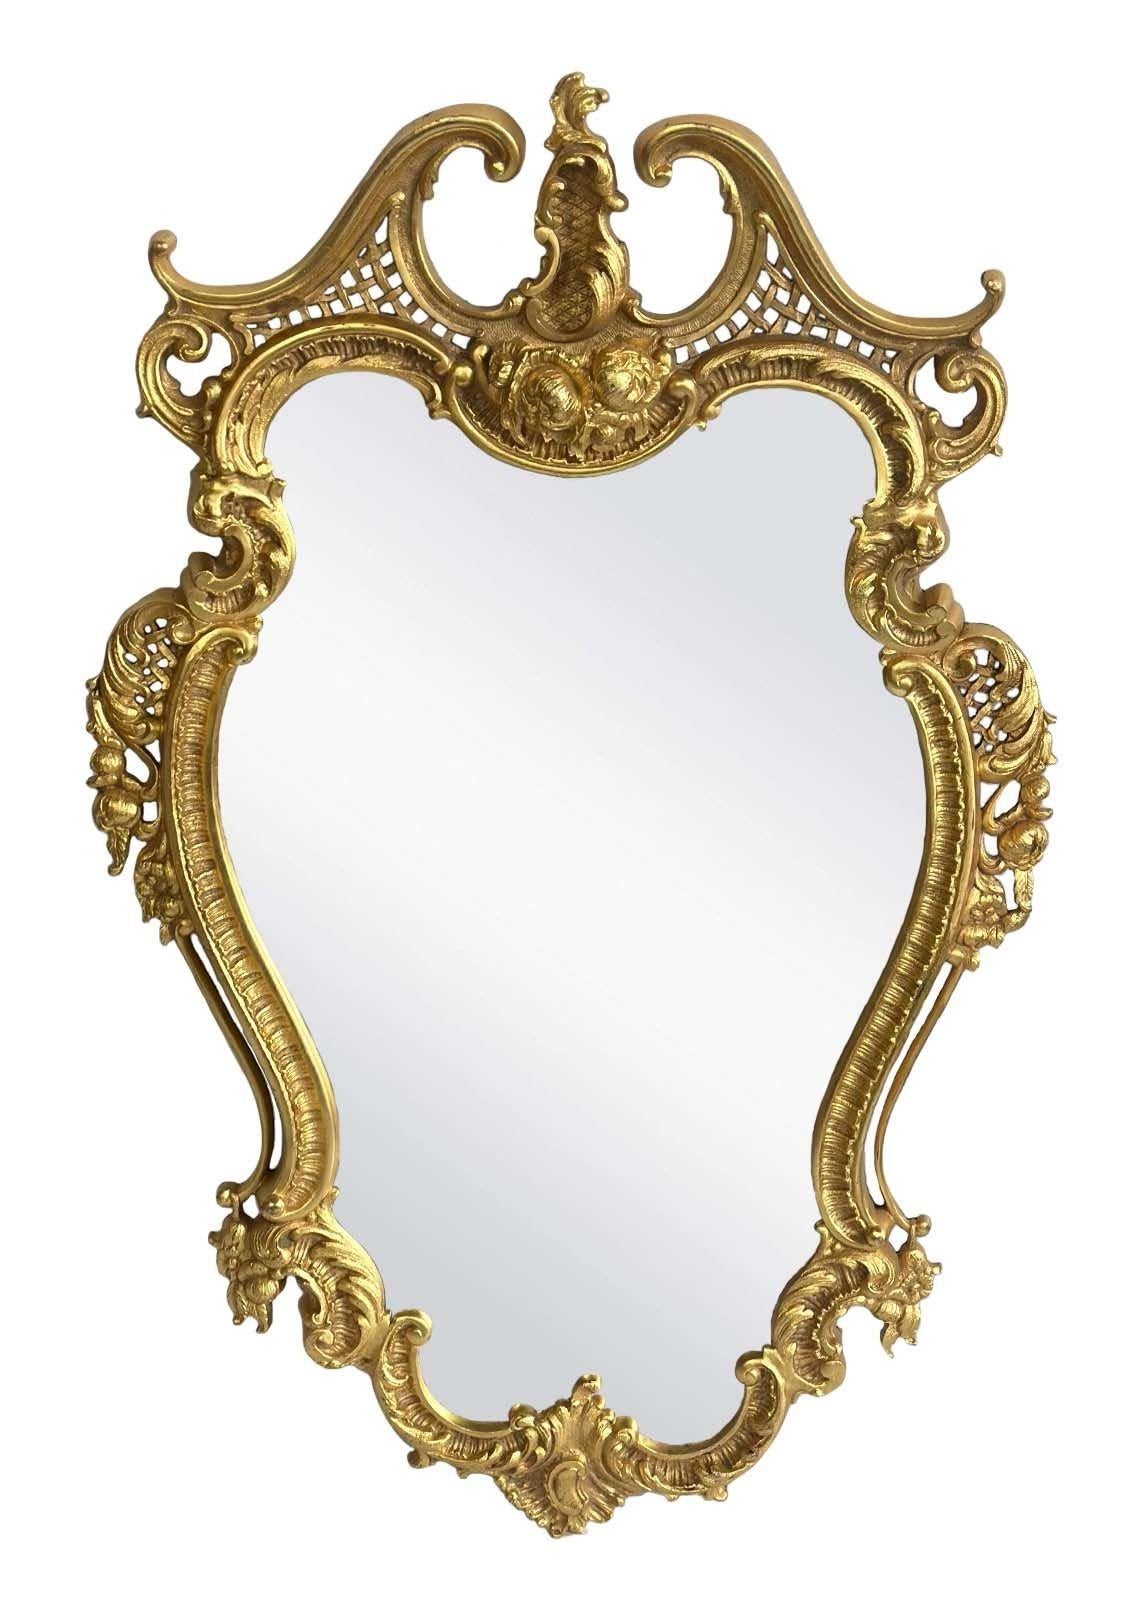 A splendid pair of Louis XV Style mirrors made from rich D'ore bronze with scroll floral and foliate motifs all around. Made in France in the early 20th Century.
Dimensions:
35